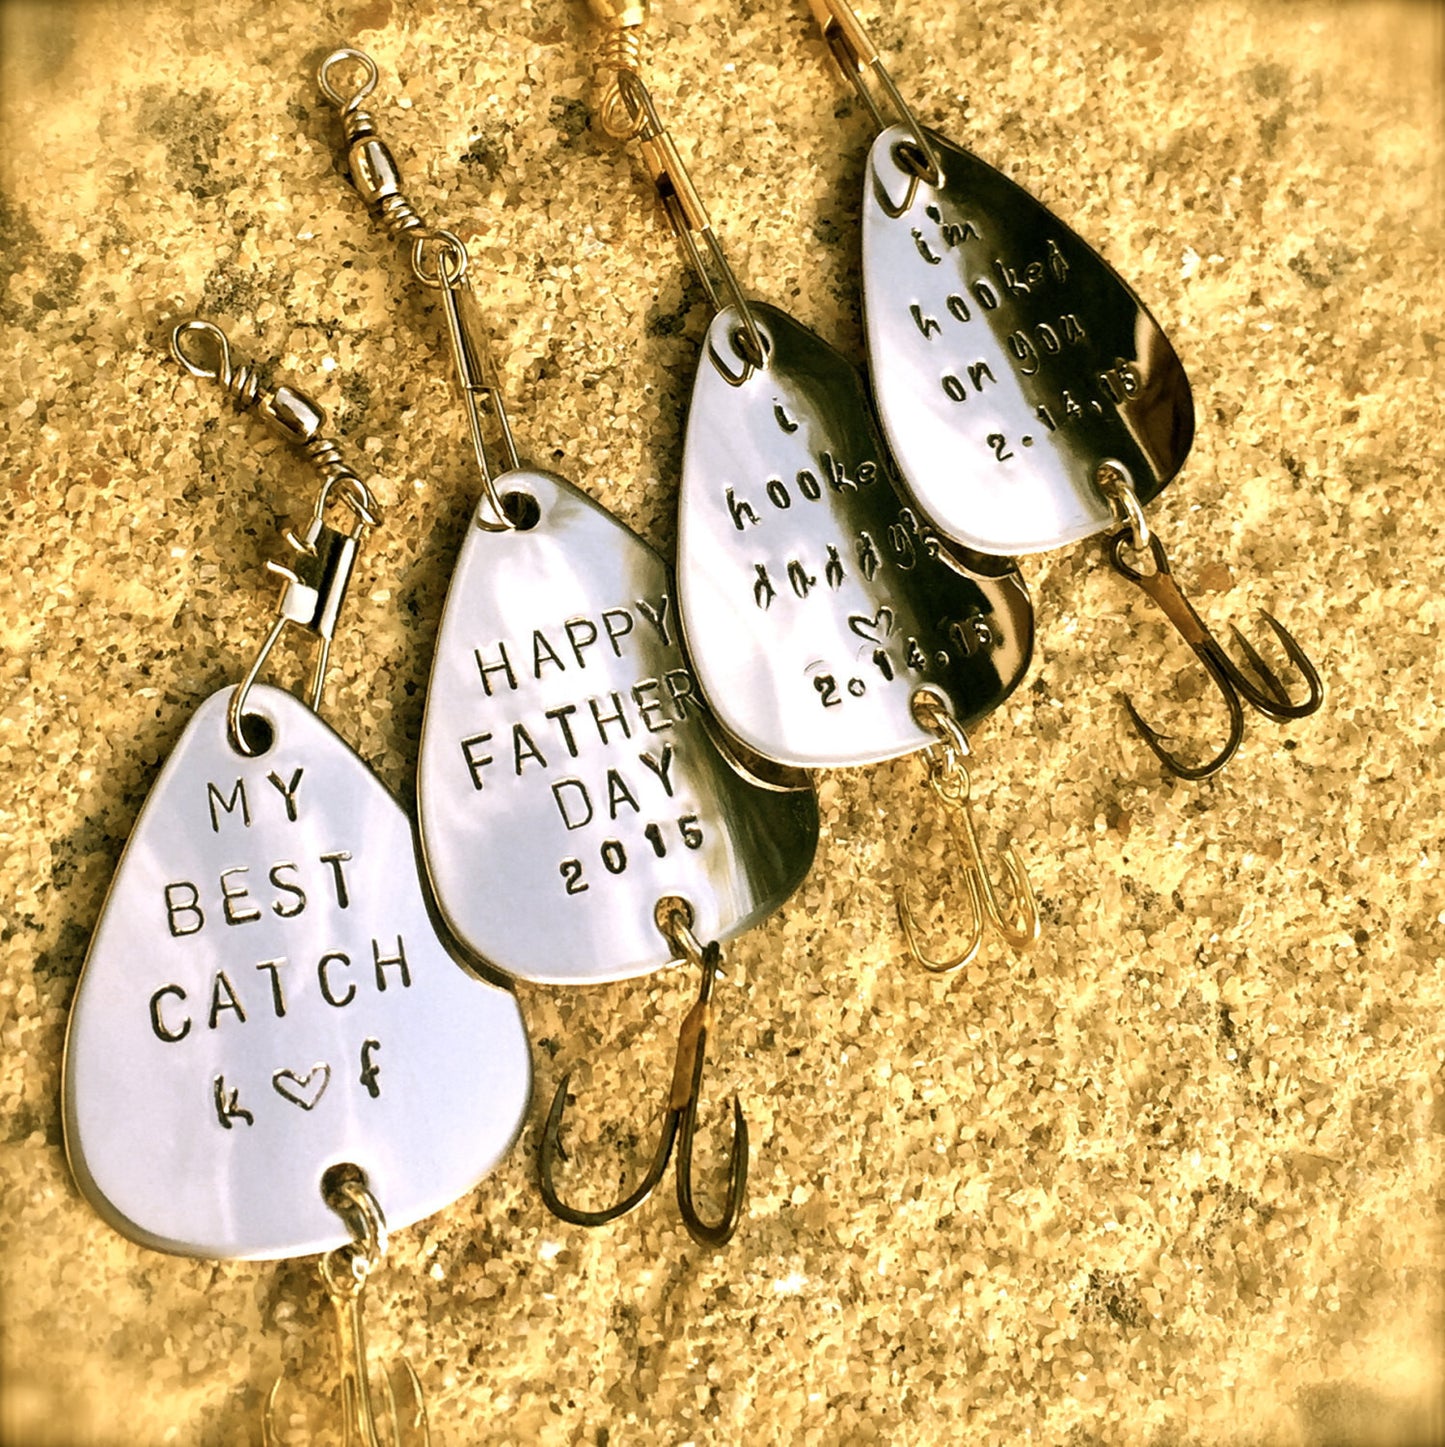 Personalized Fishing Lure Key Chain Gift Greatest Catch